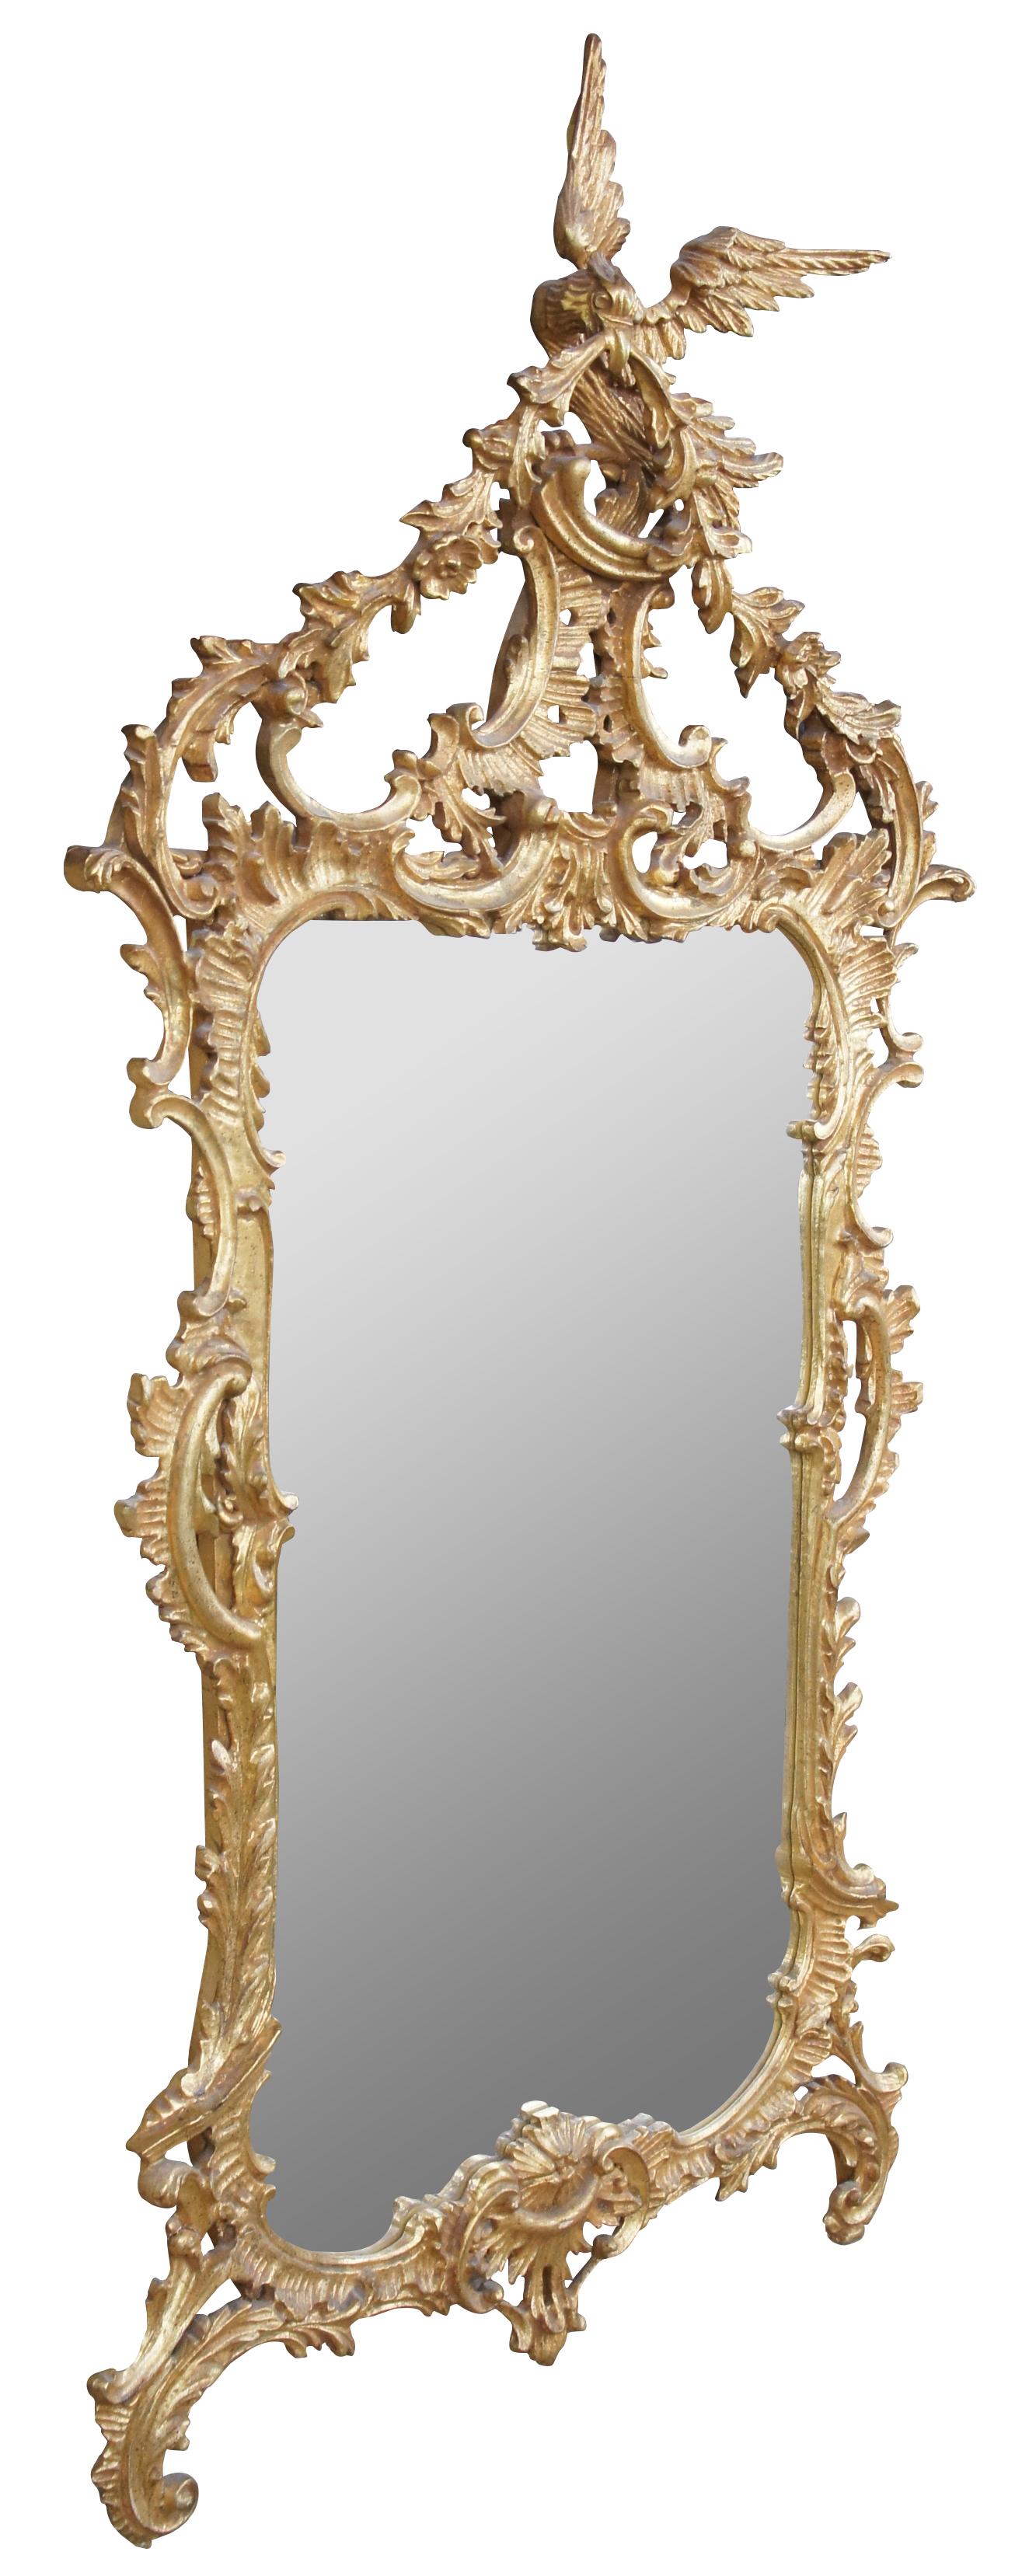 Vintage circa 1980s Baroque / Rococo / Chinese Chippendale inspired wall mirror by Carvers Guild. Made of wood, painted with antique gold leaf finish. Features ornate scalloped Italian design with florals, a wreath and dove or bird topper.
  